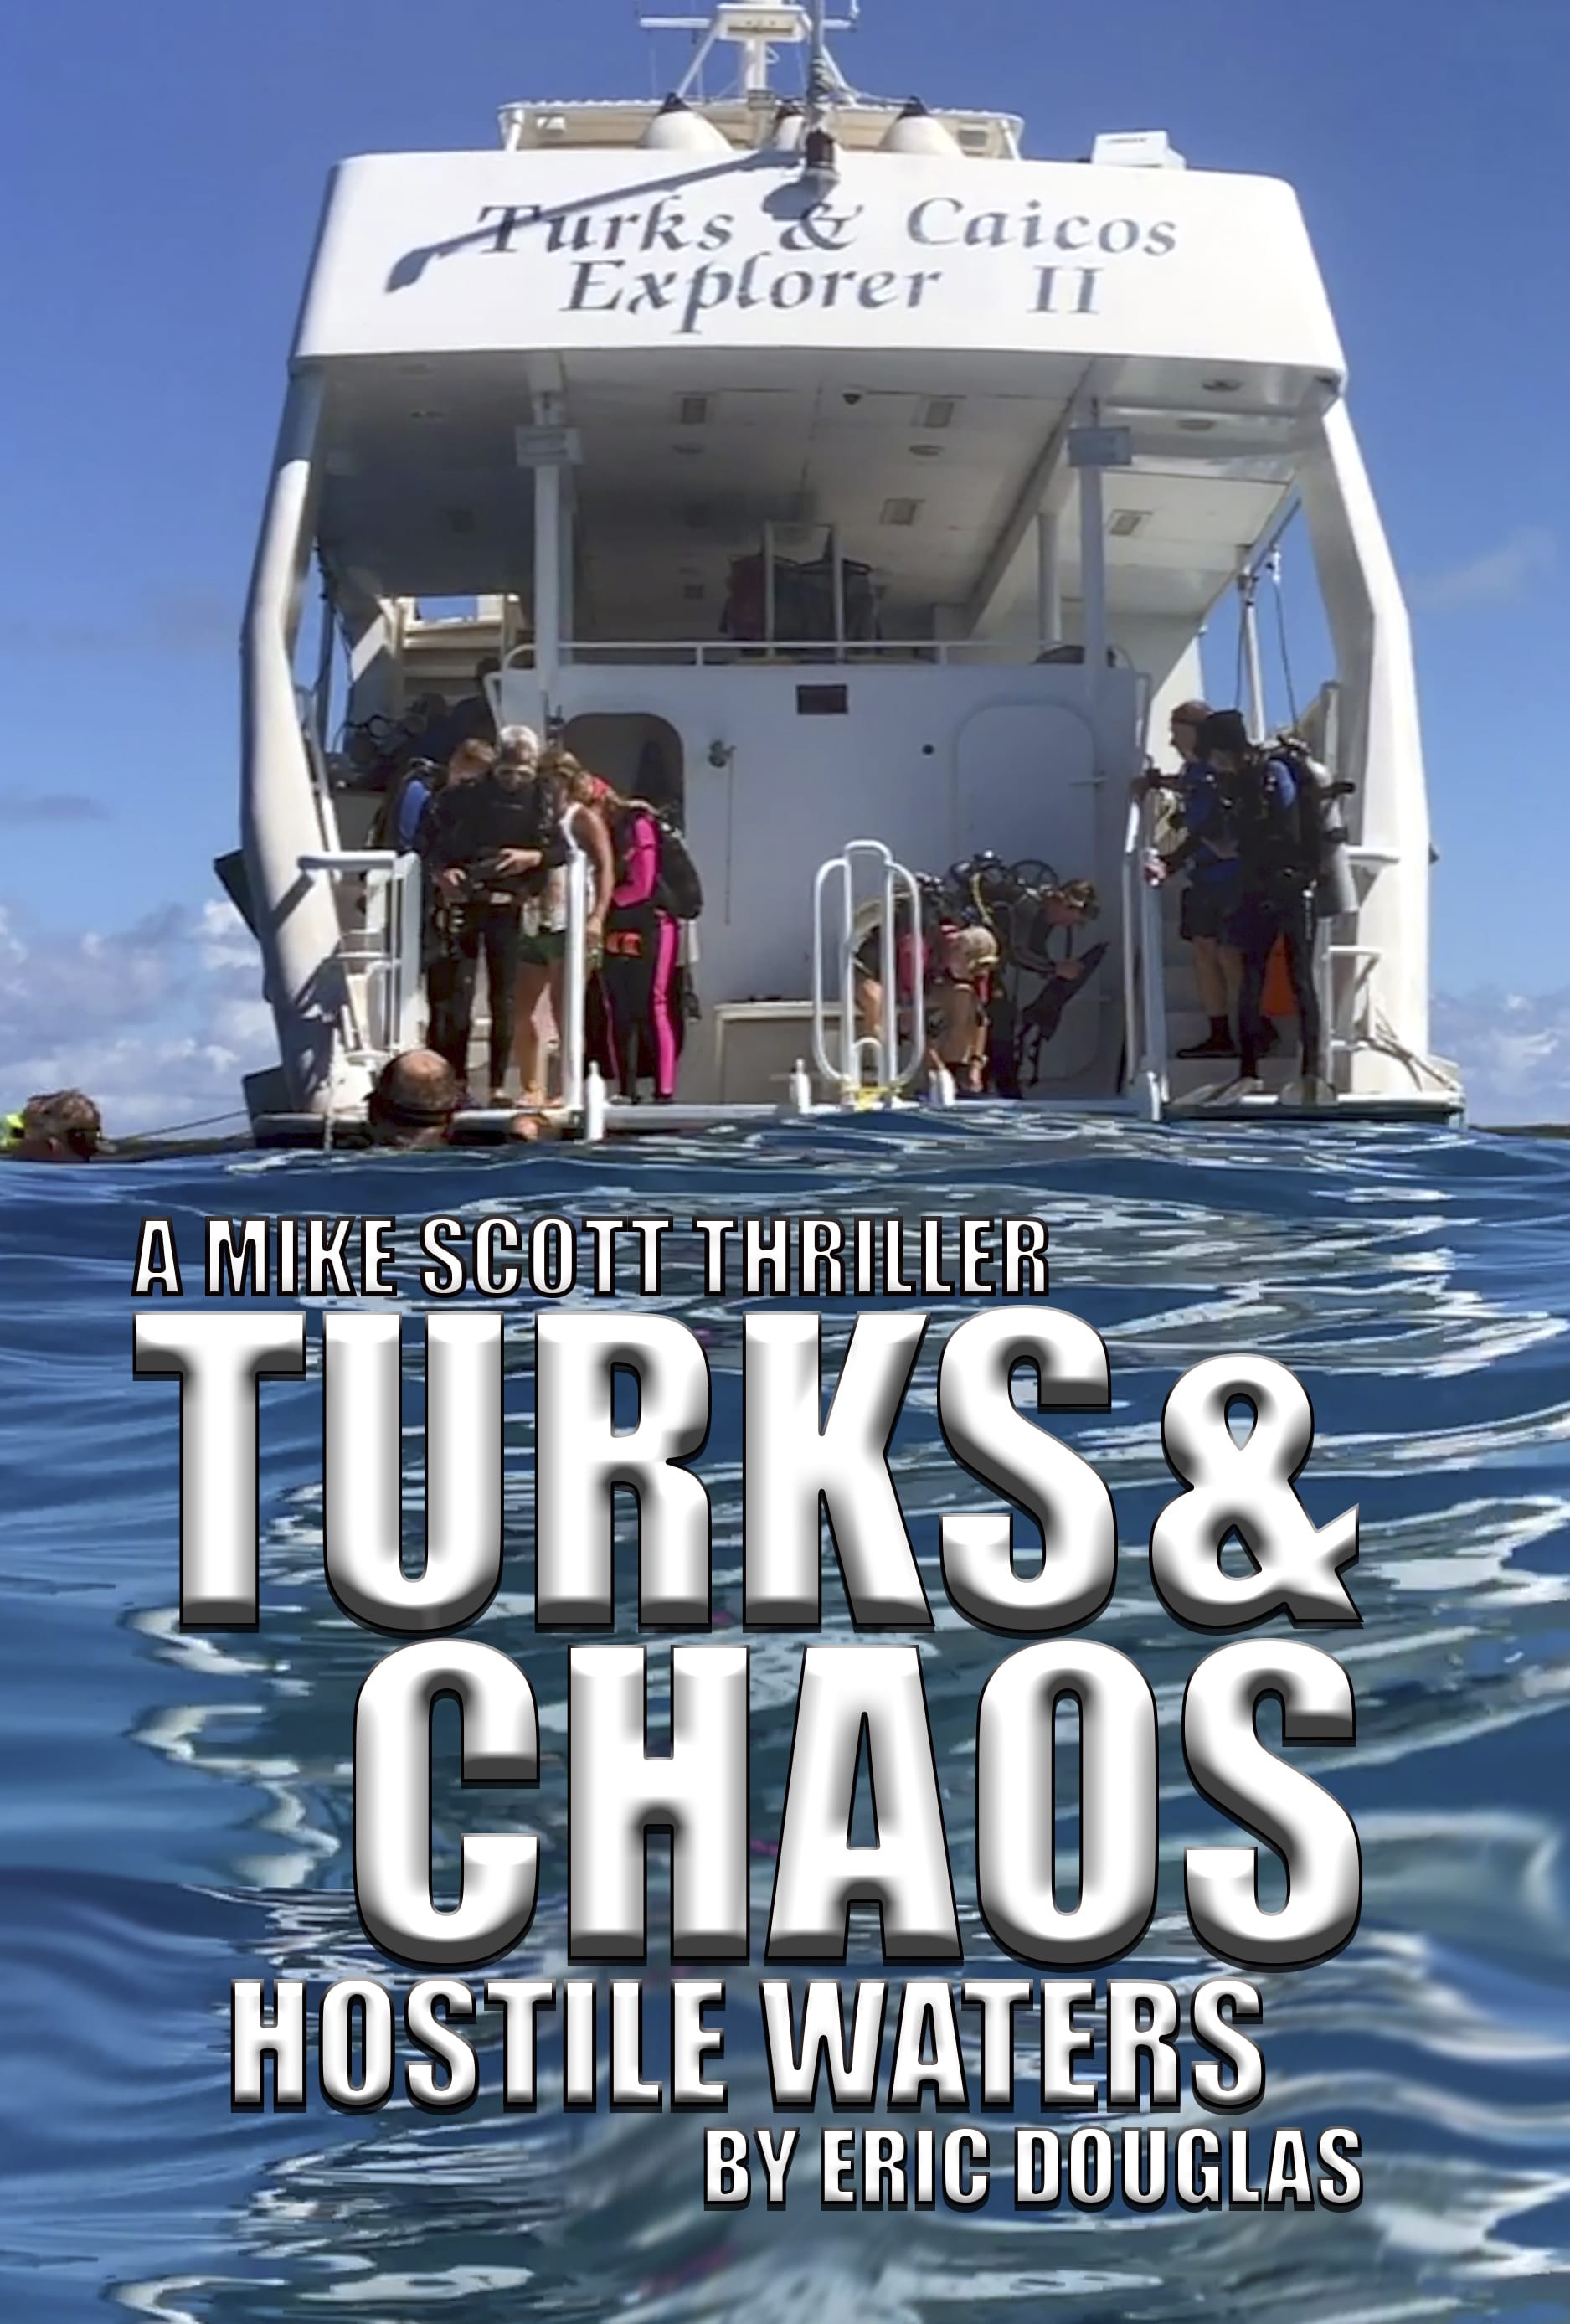 'Turks and Chaos: Hostile Waters' Audiobook Now Available